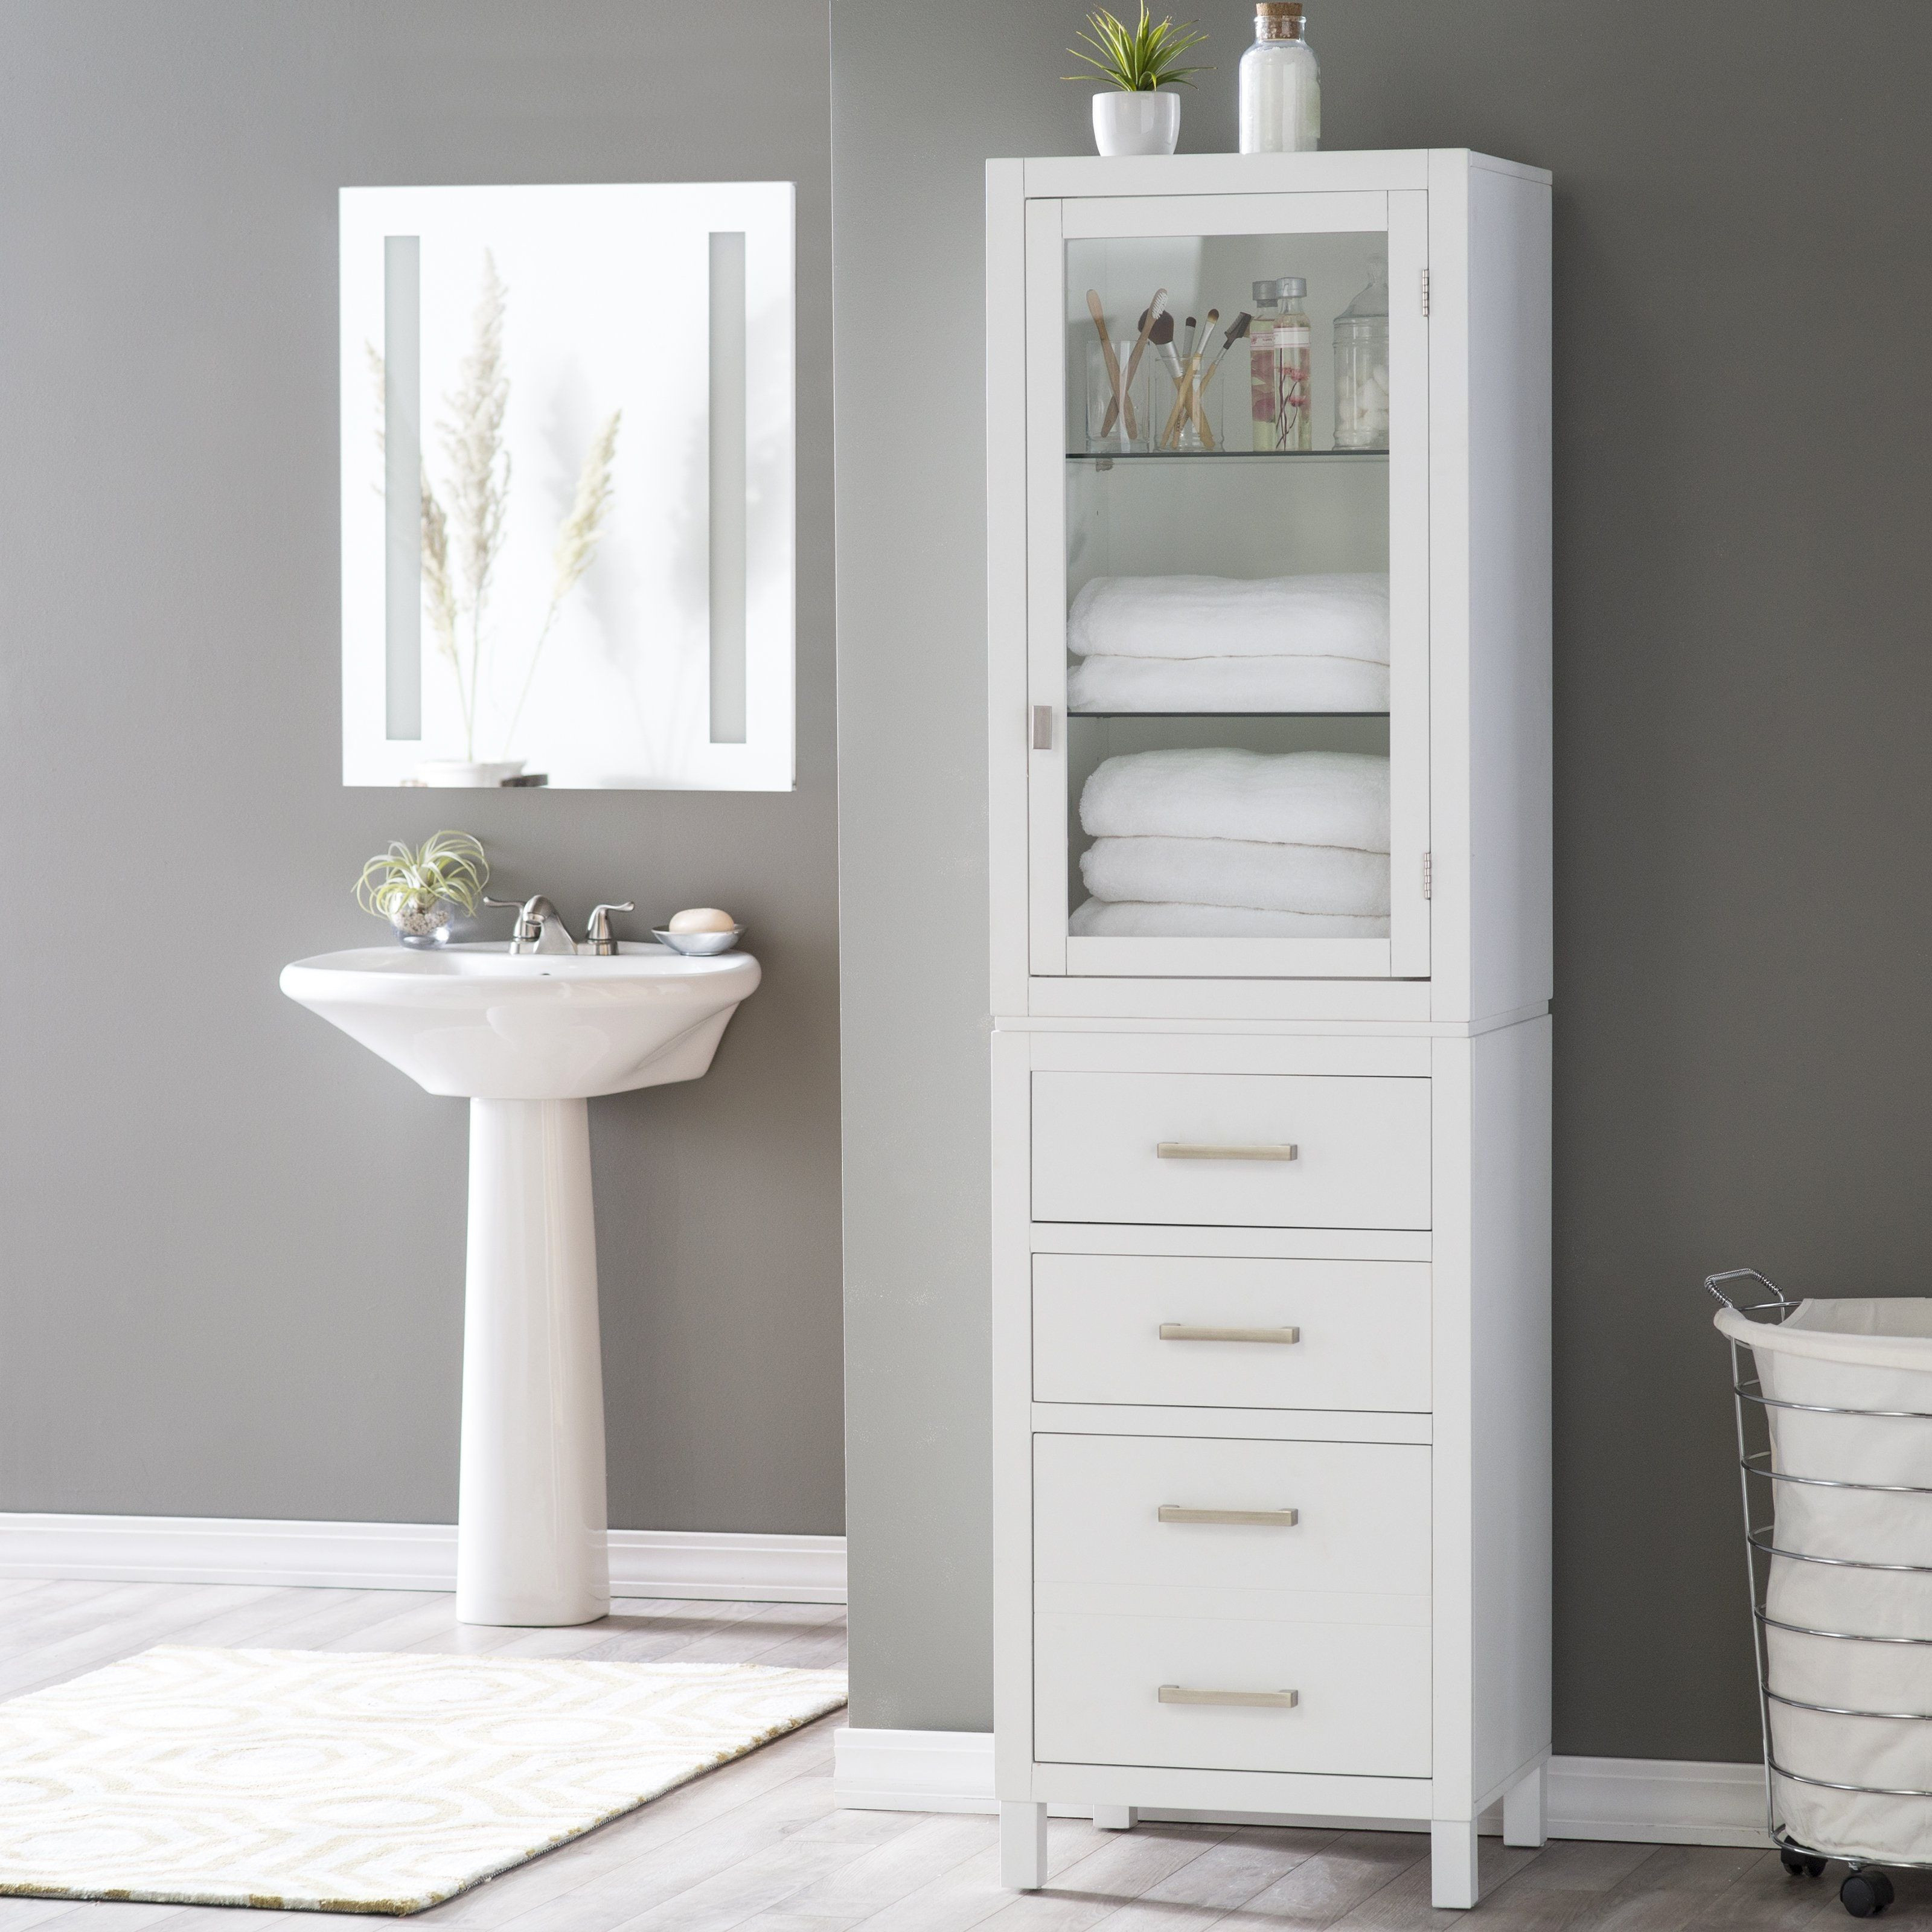 Tall Corner Bathroom Cabinet Best Of Image Result For Modern within measurements 3200 X 3200